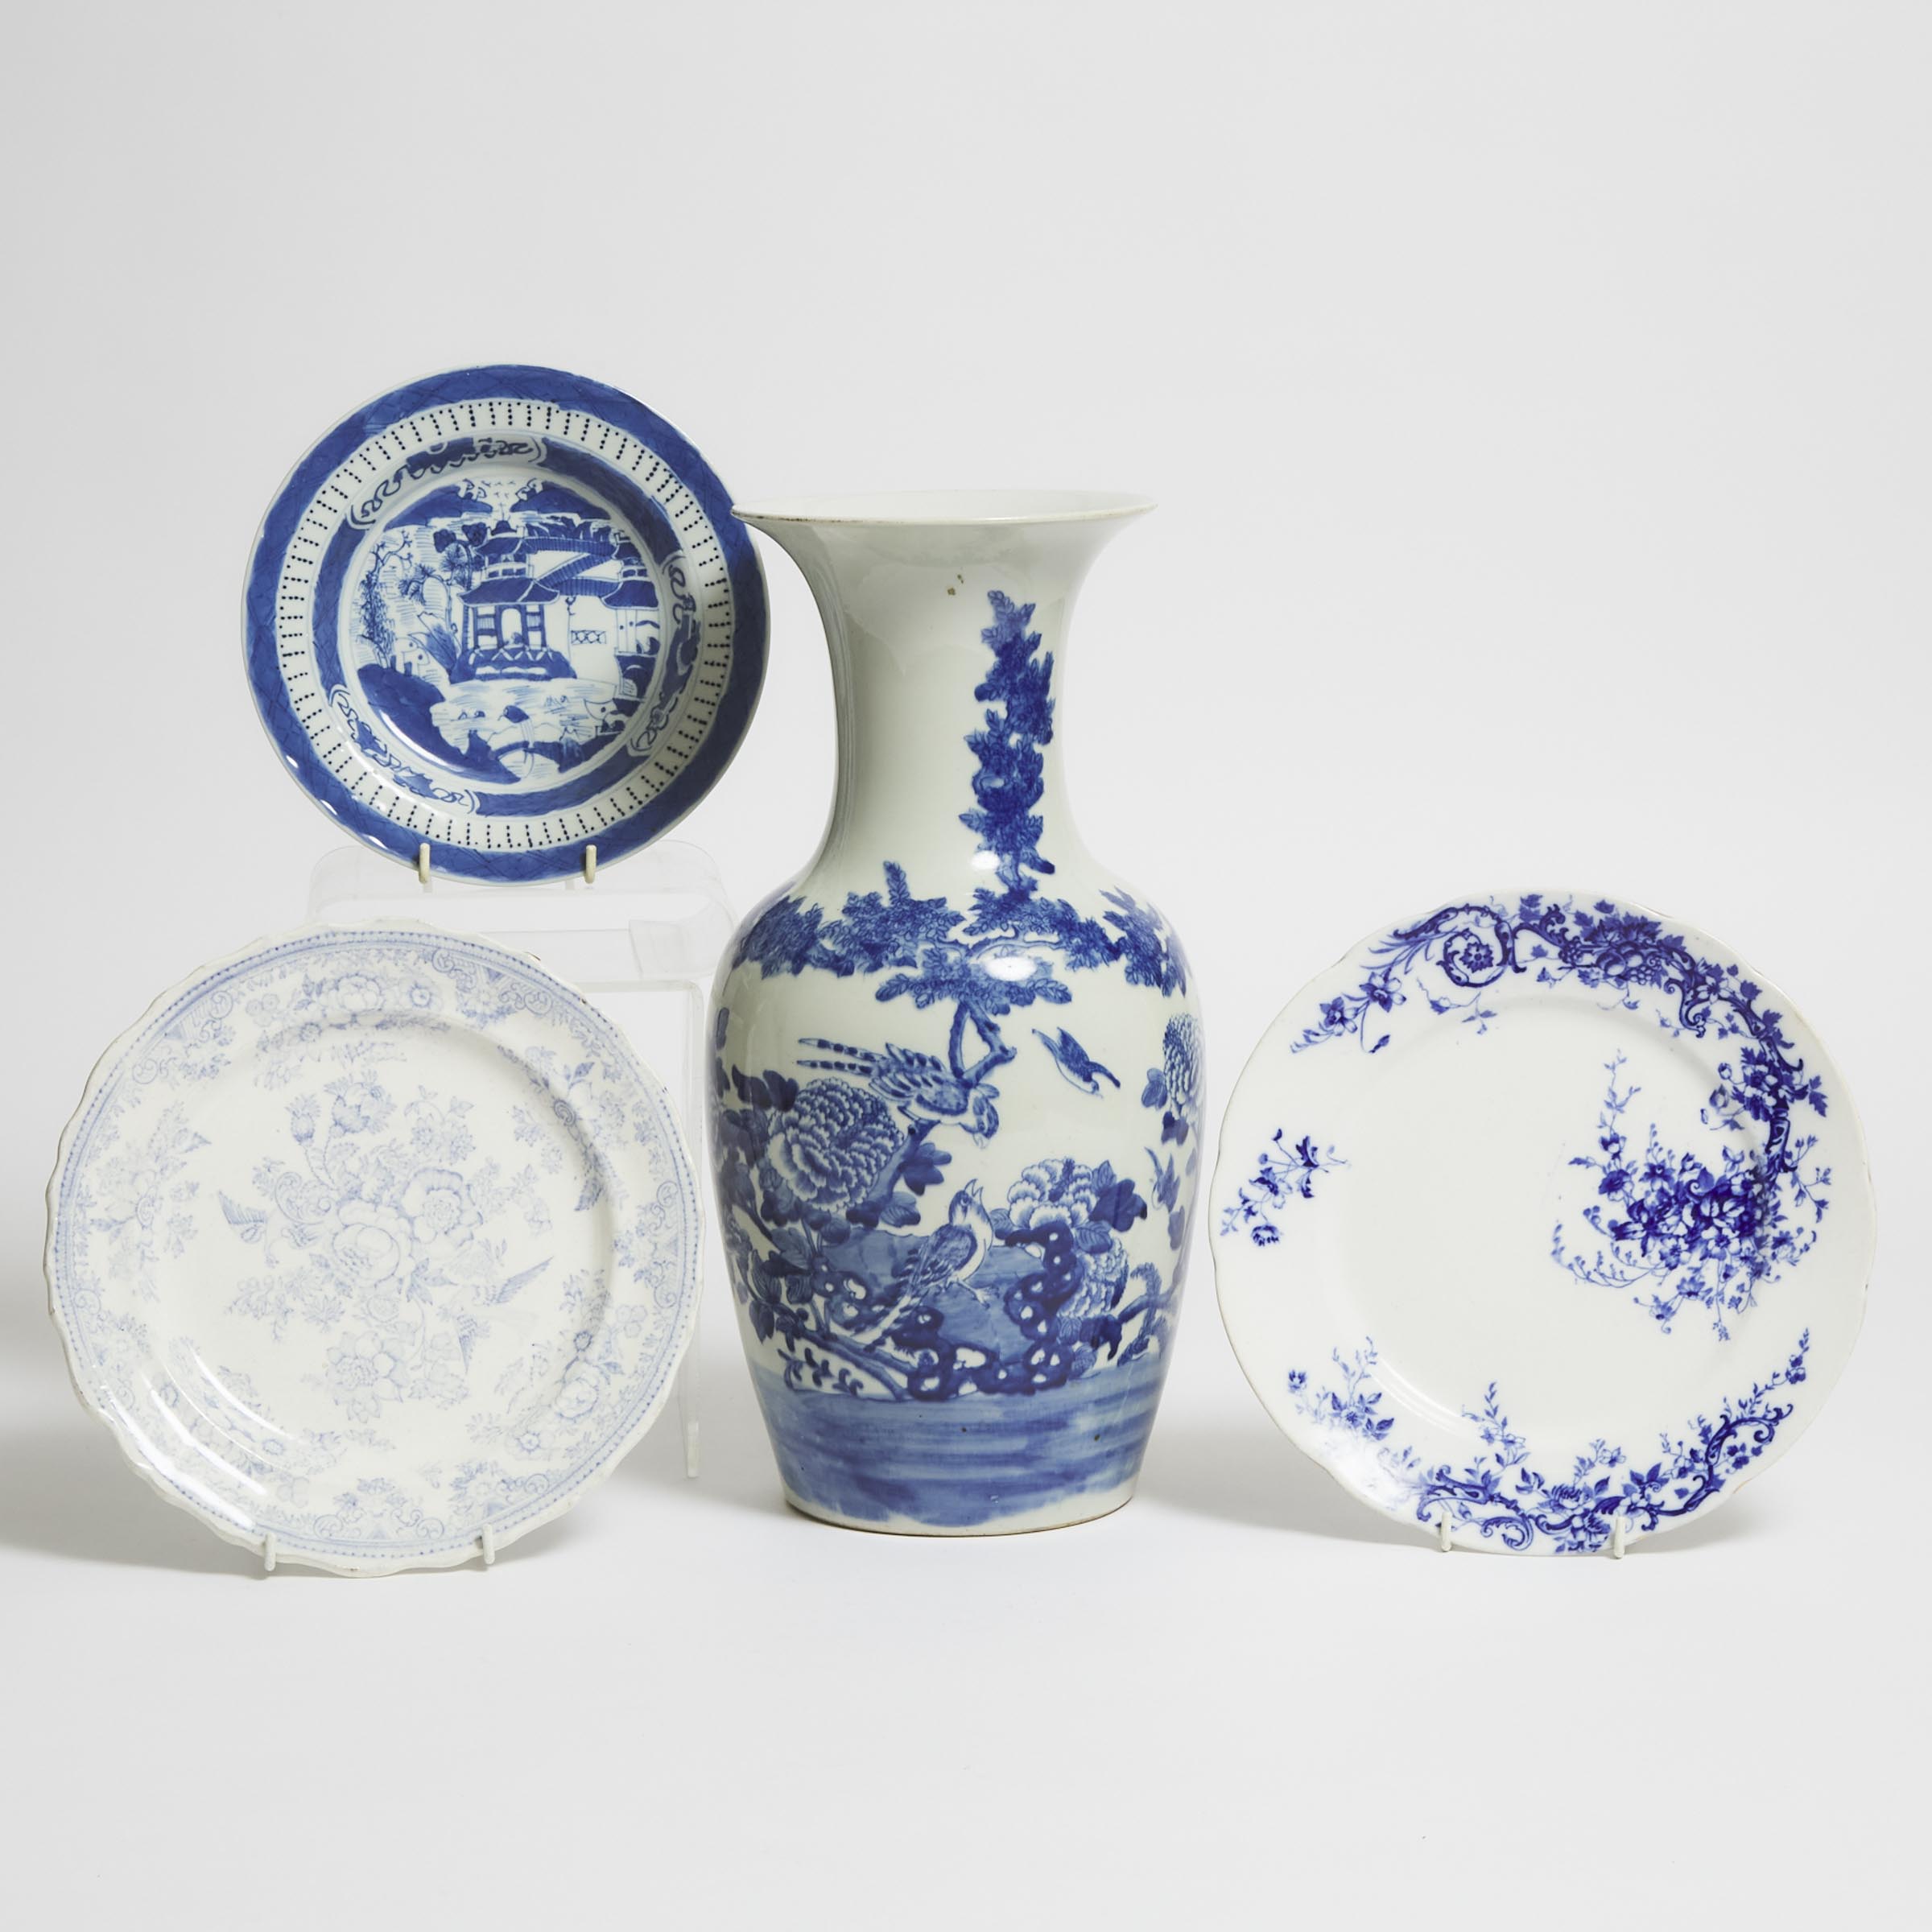 A Blue and White 'Birds and Flowers' Vase, Together With Three Blue and White Dishes, 19th Century